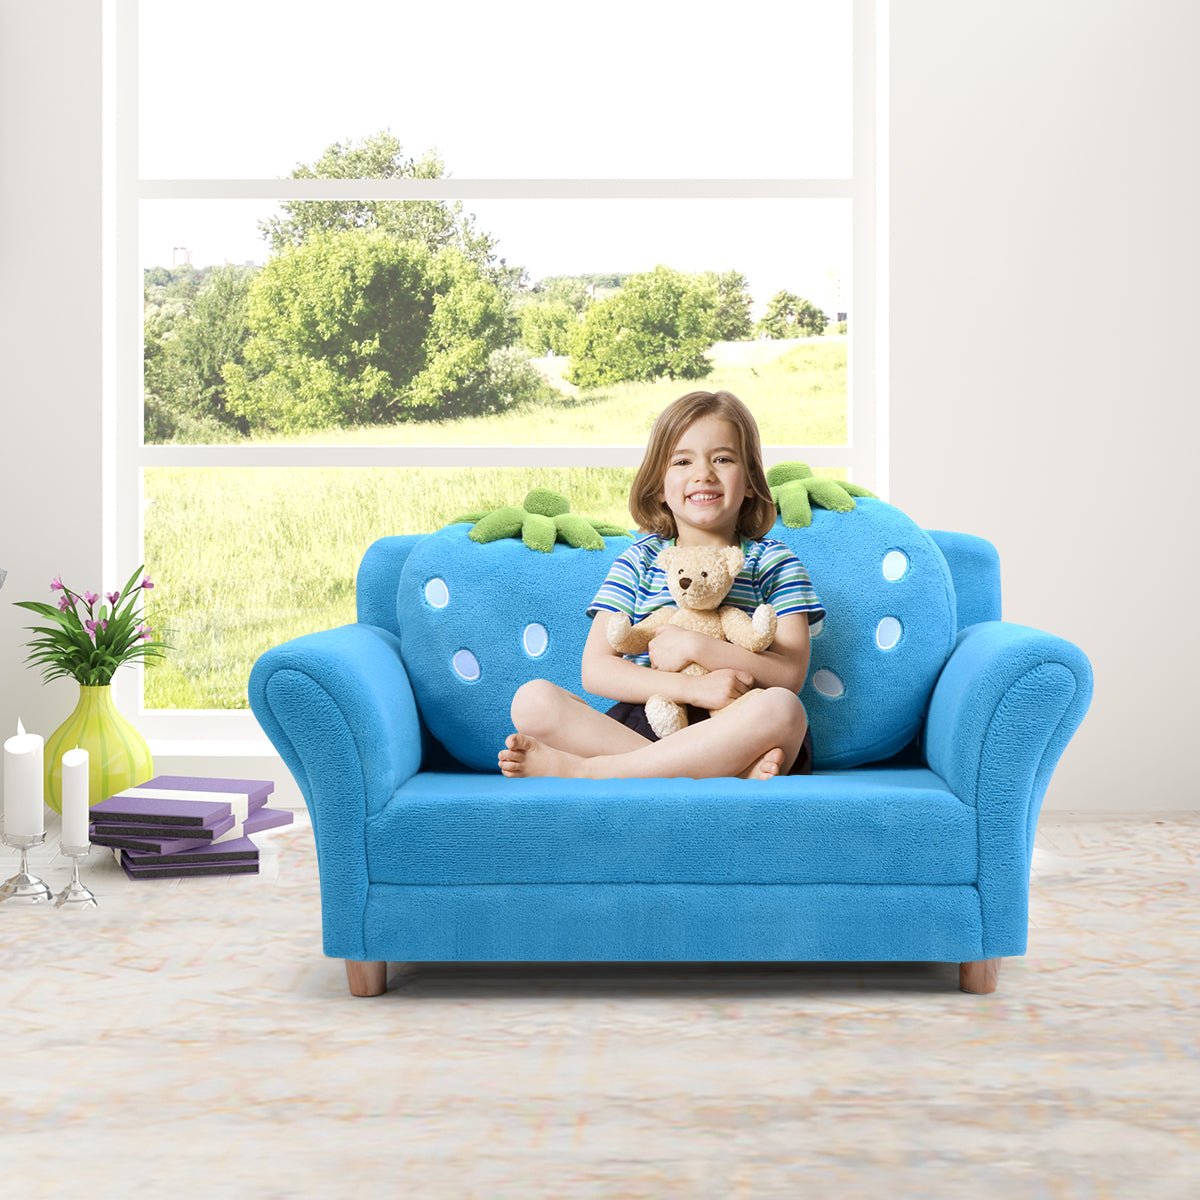 2-Seat Kids Sofa Bed: Lounge with 2 Strawberry Pillows for Comfort